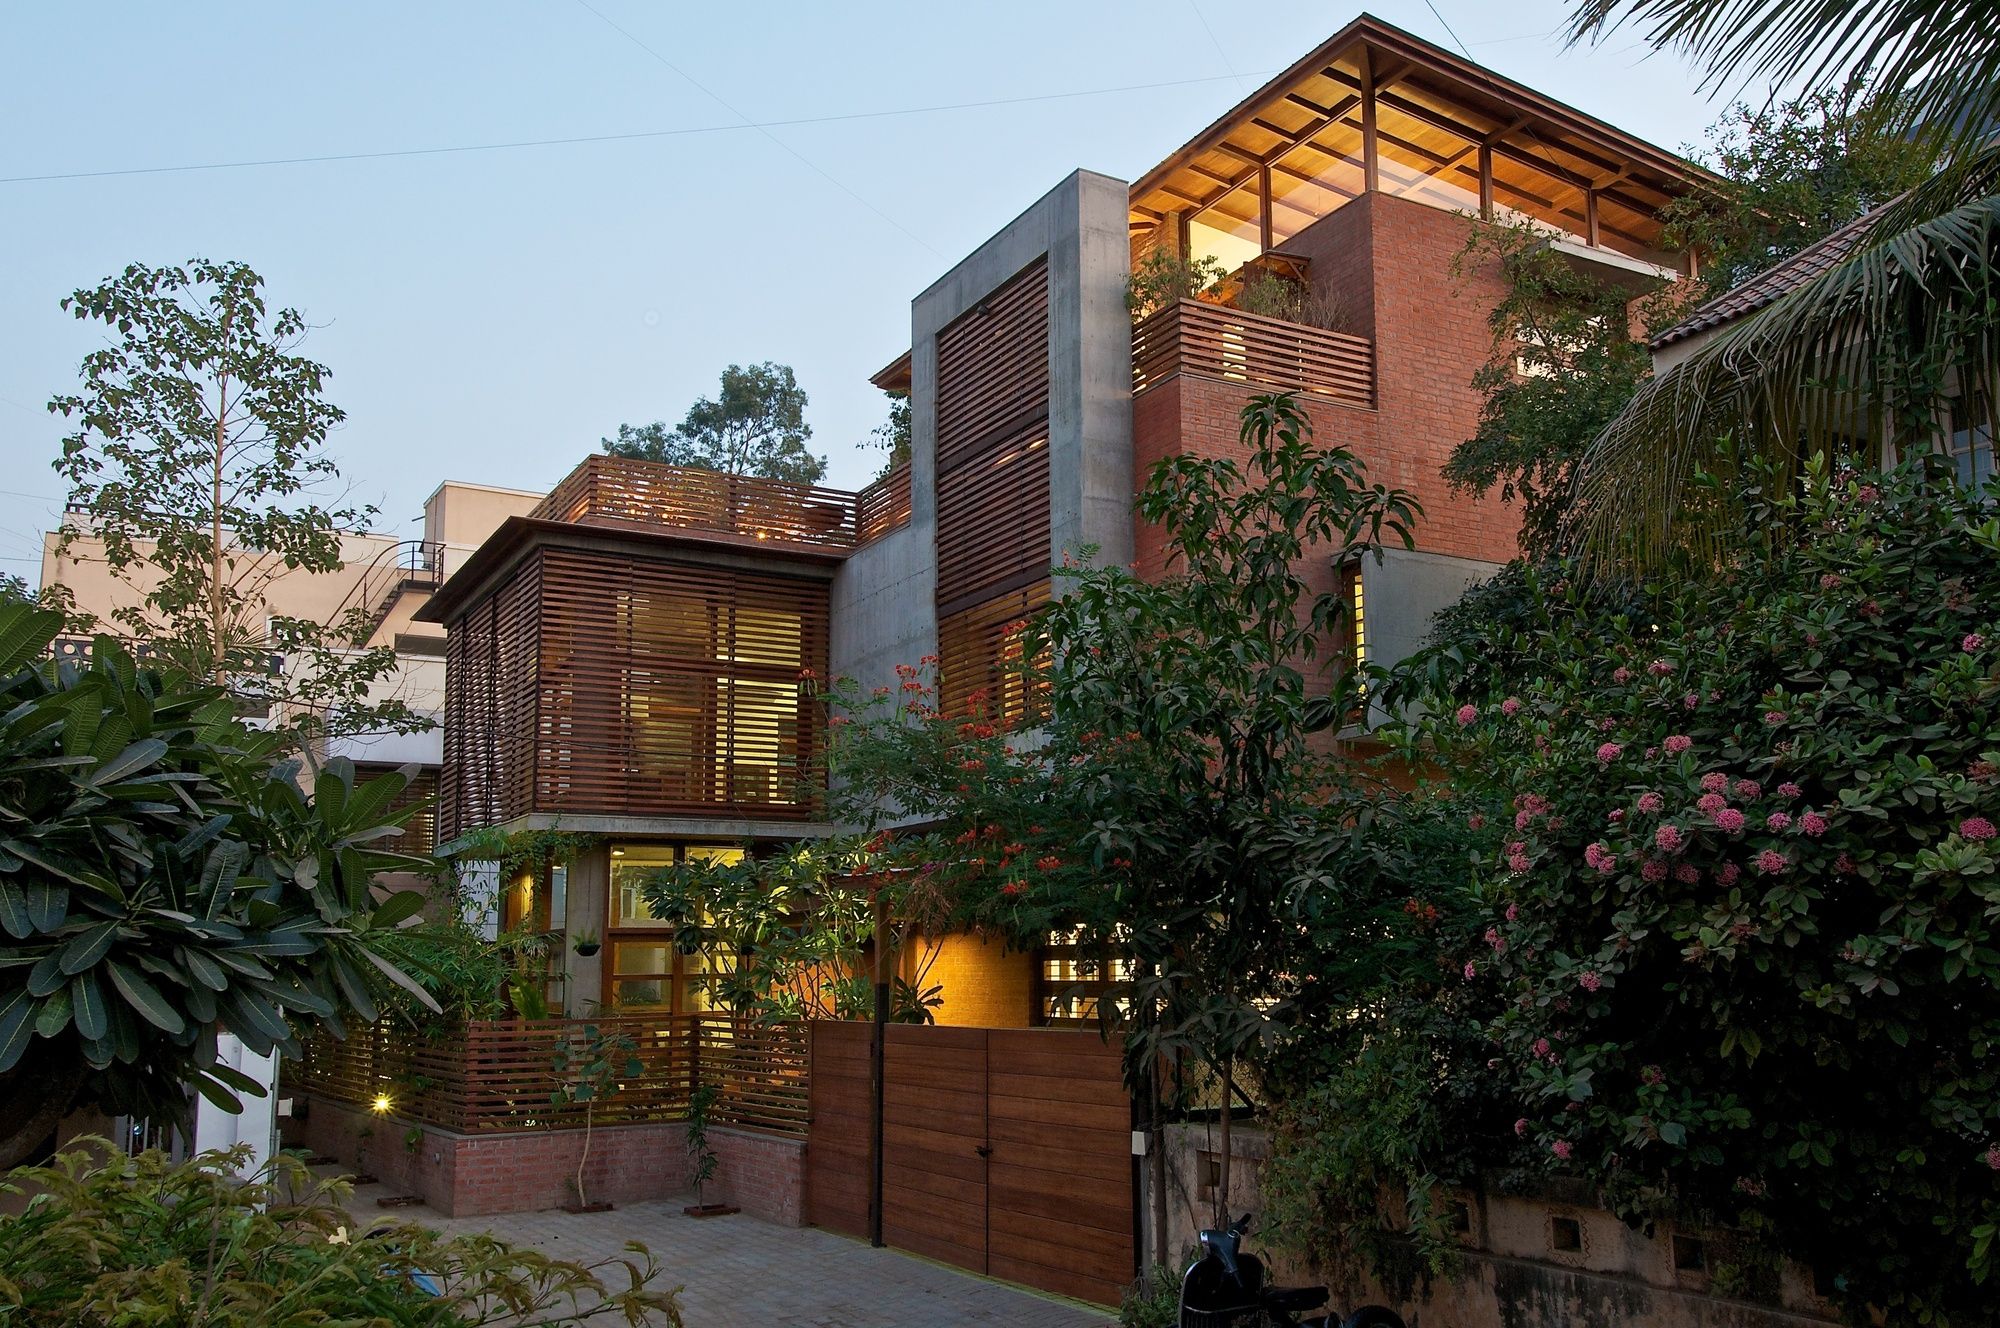 509d3d68b3fc4b56c10000cc_the-green-house-hiren-patel-architects_the_green_house_exterior_view_1